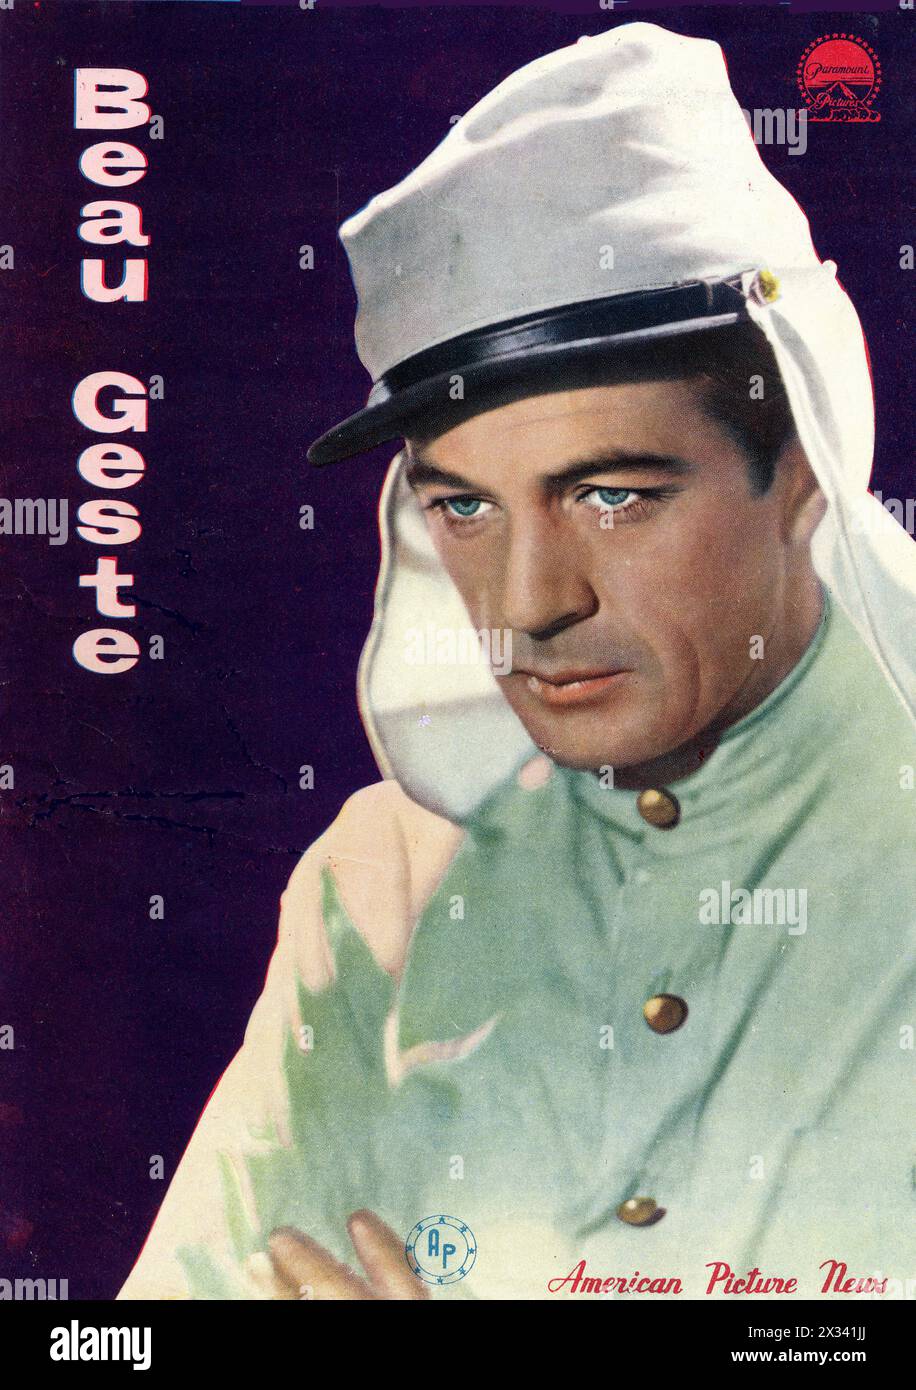 Japanese Magazine Cover of GARY COOPER in BEAU GESTE 1939 Director WILLIAM A. WELLMAN Novel P. C. WREN Paramount Pictures Stock Photo